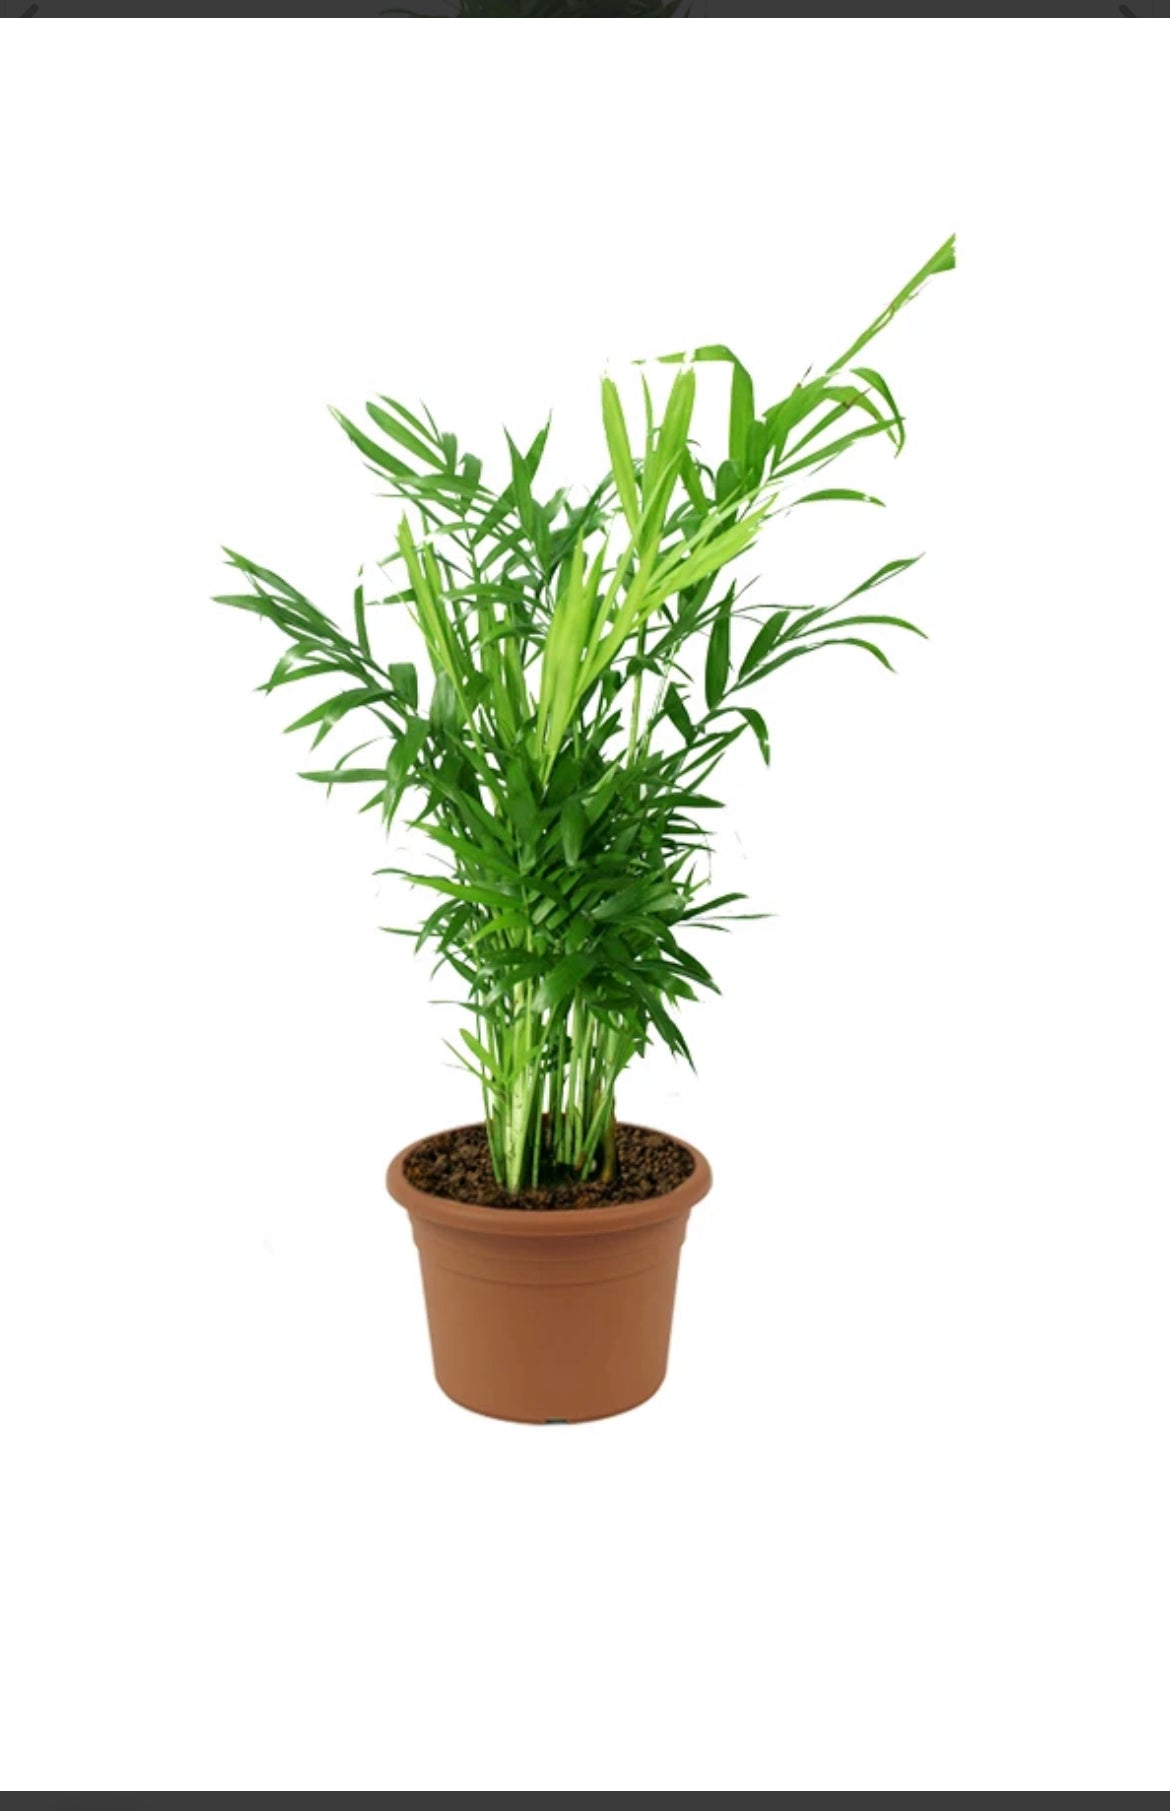 Bamboo Palm - Chamaedorea Elegans Or Parlour Palm(Height 20 to 30cm) indoor plant